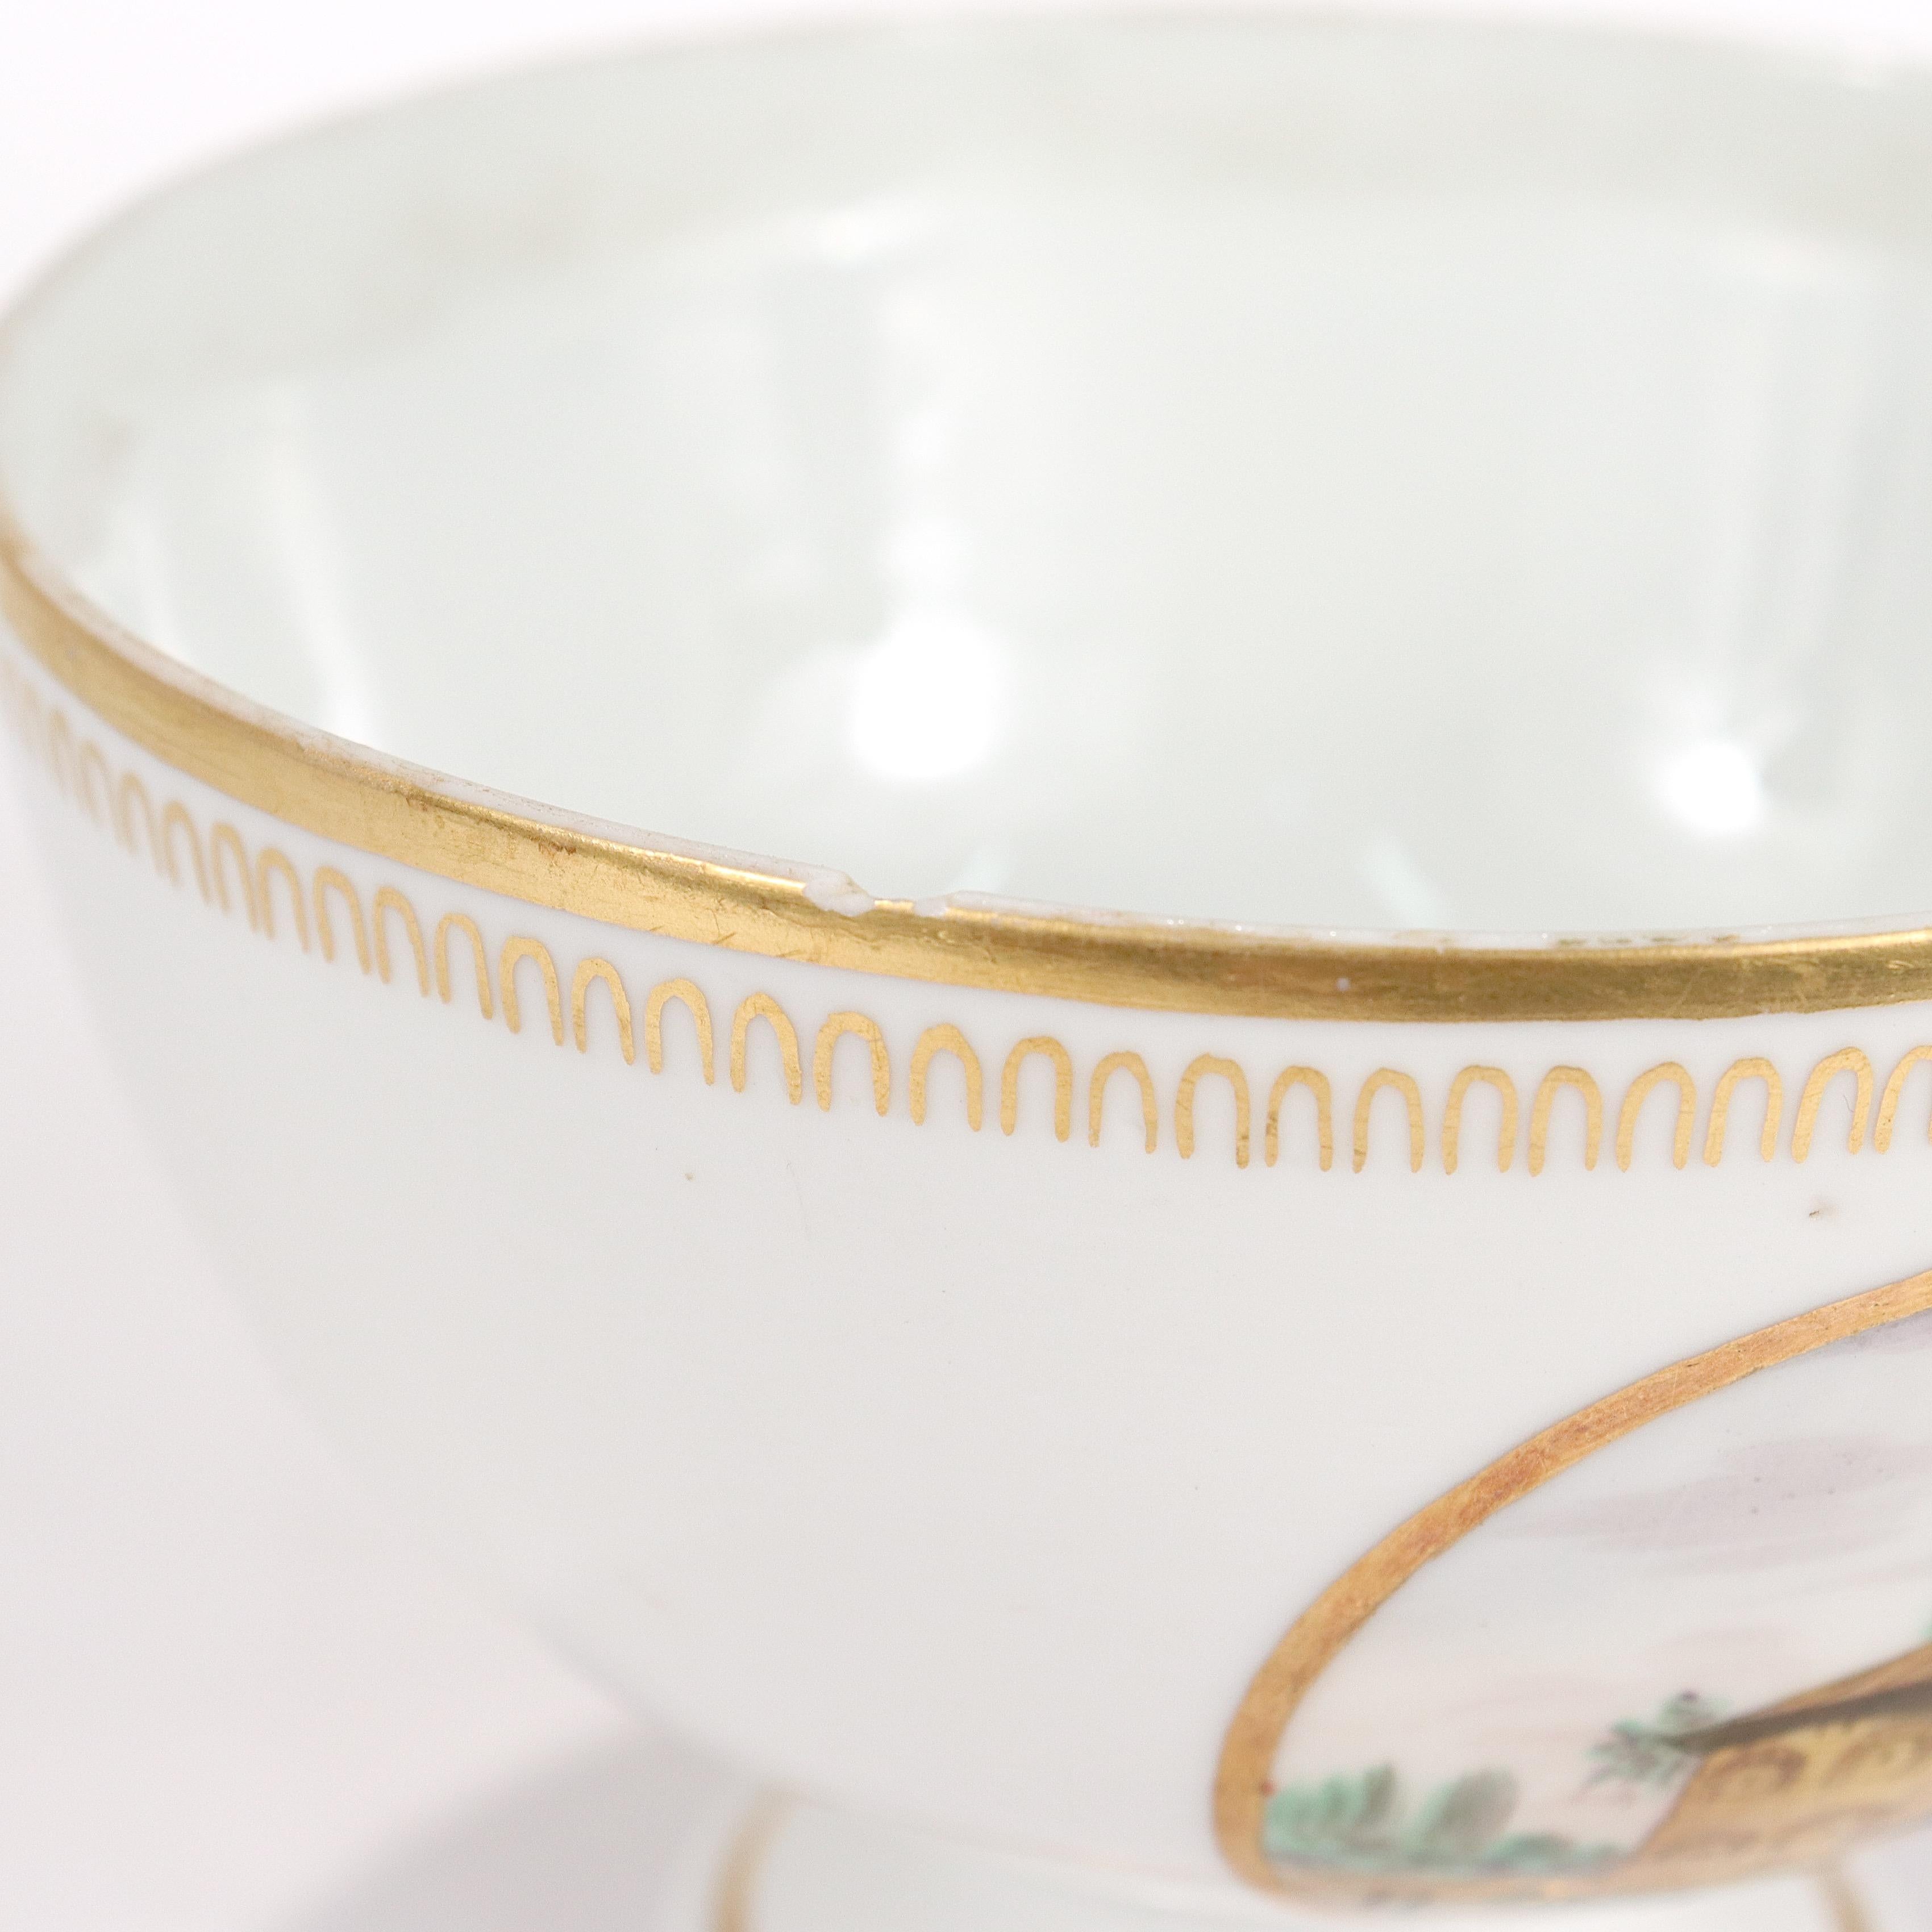 Antique Doccia Porcelain Italian Neoclassical Topographical Waste Bowl For Sale 8